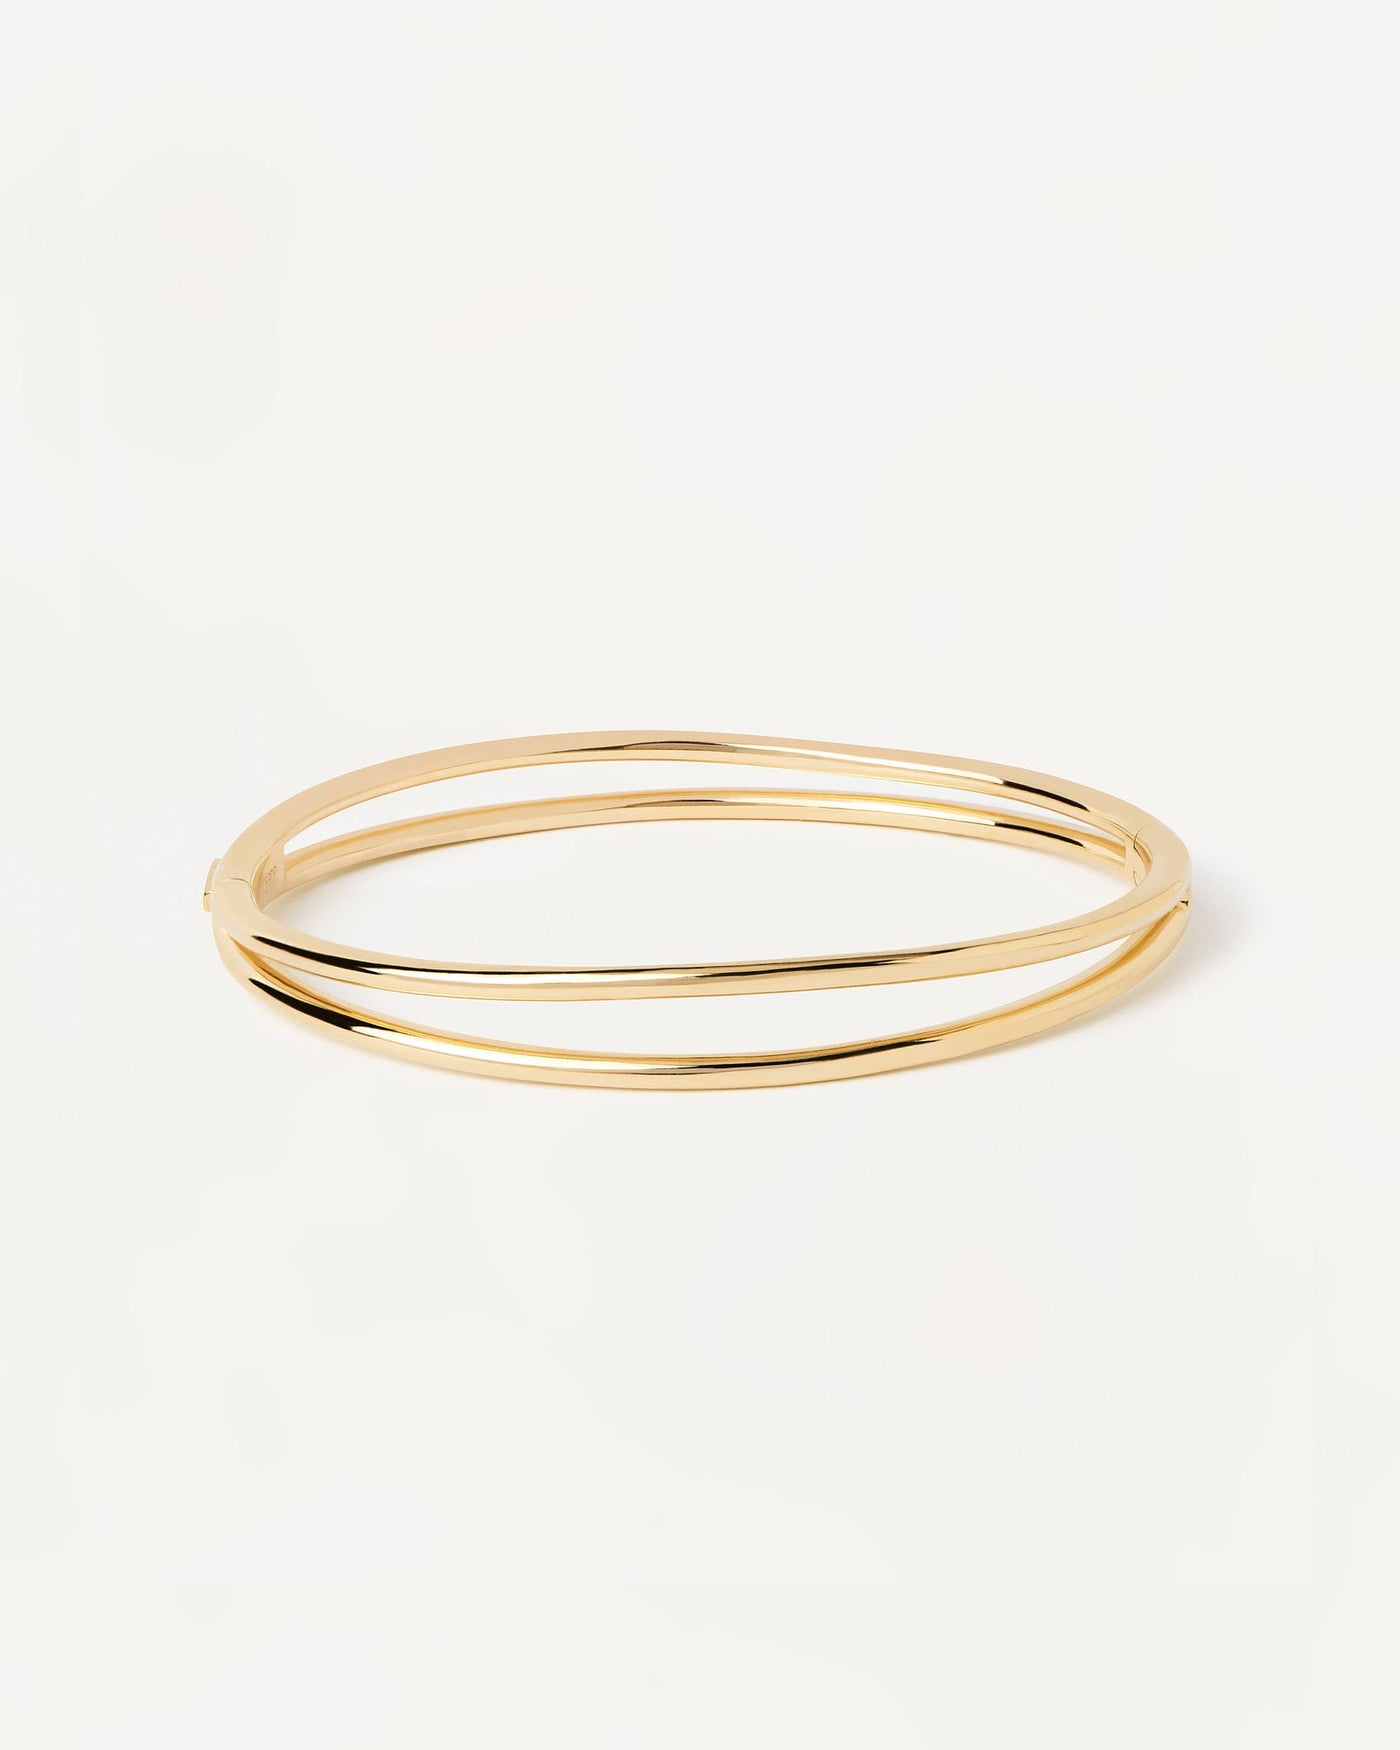 2024 Selection | Twister Bangle. Hinged rigid bracelet with two bands in gold-plated silver. Get the latest arrival from PDPAOLA. Place your order safely and get this Best Seller. Free Shipping.